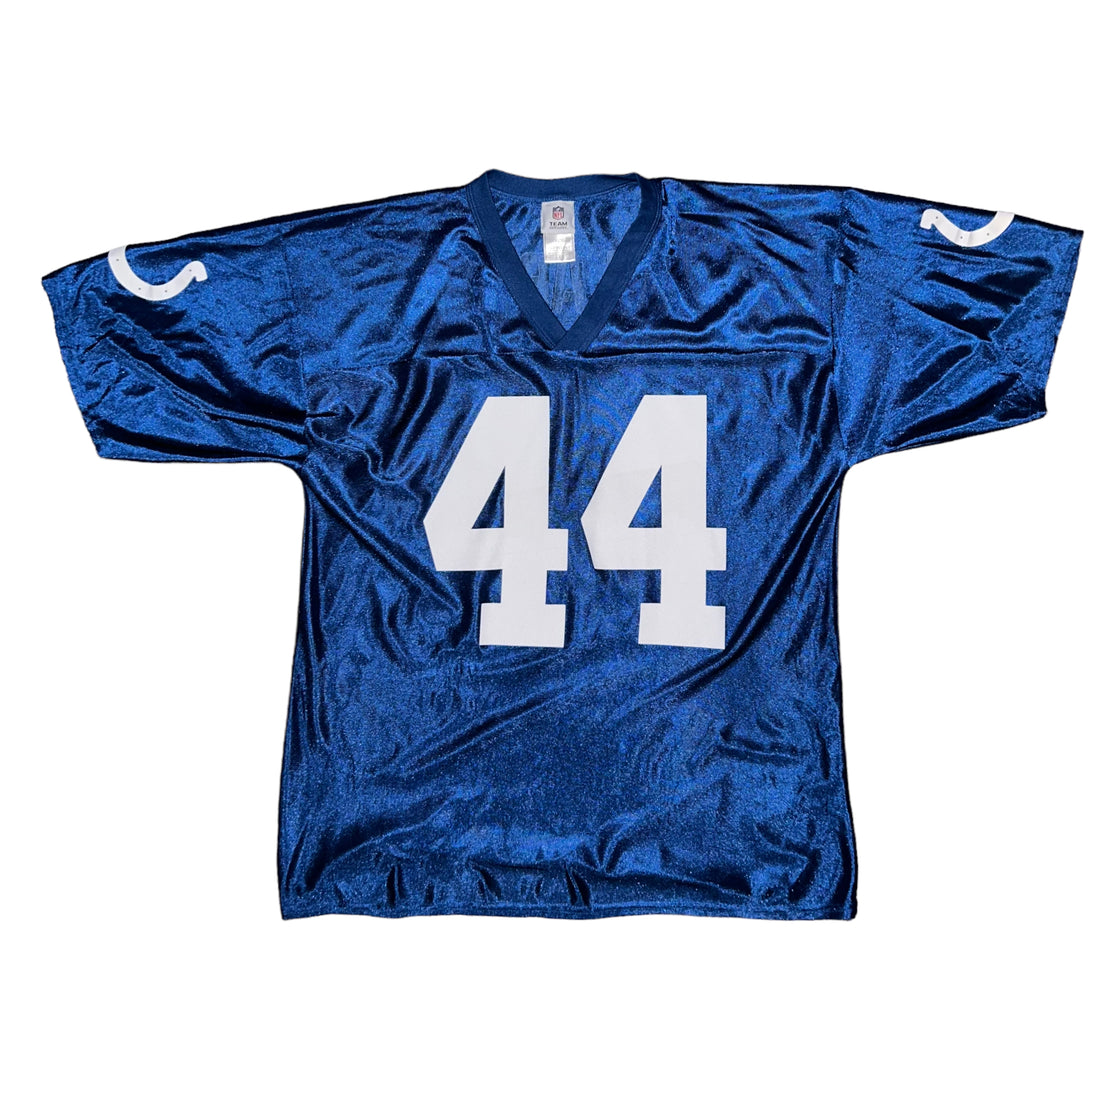 Jersey NFL Indianapolis Colts Team Appareal (L)